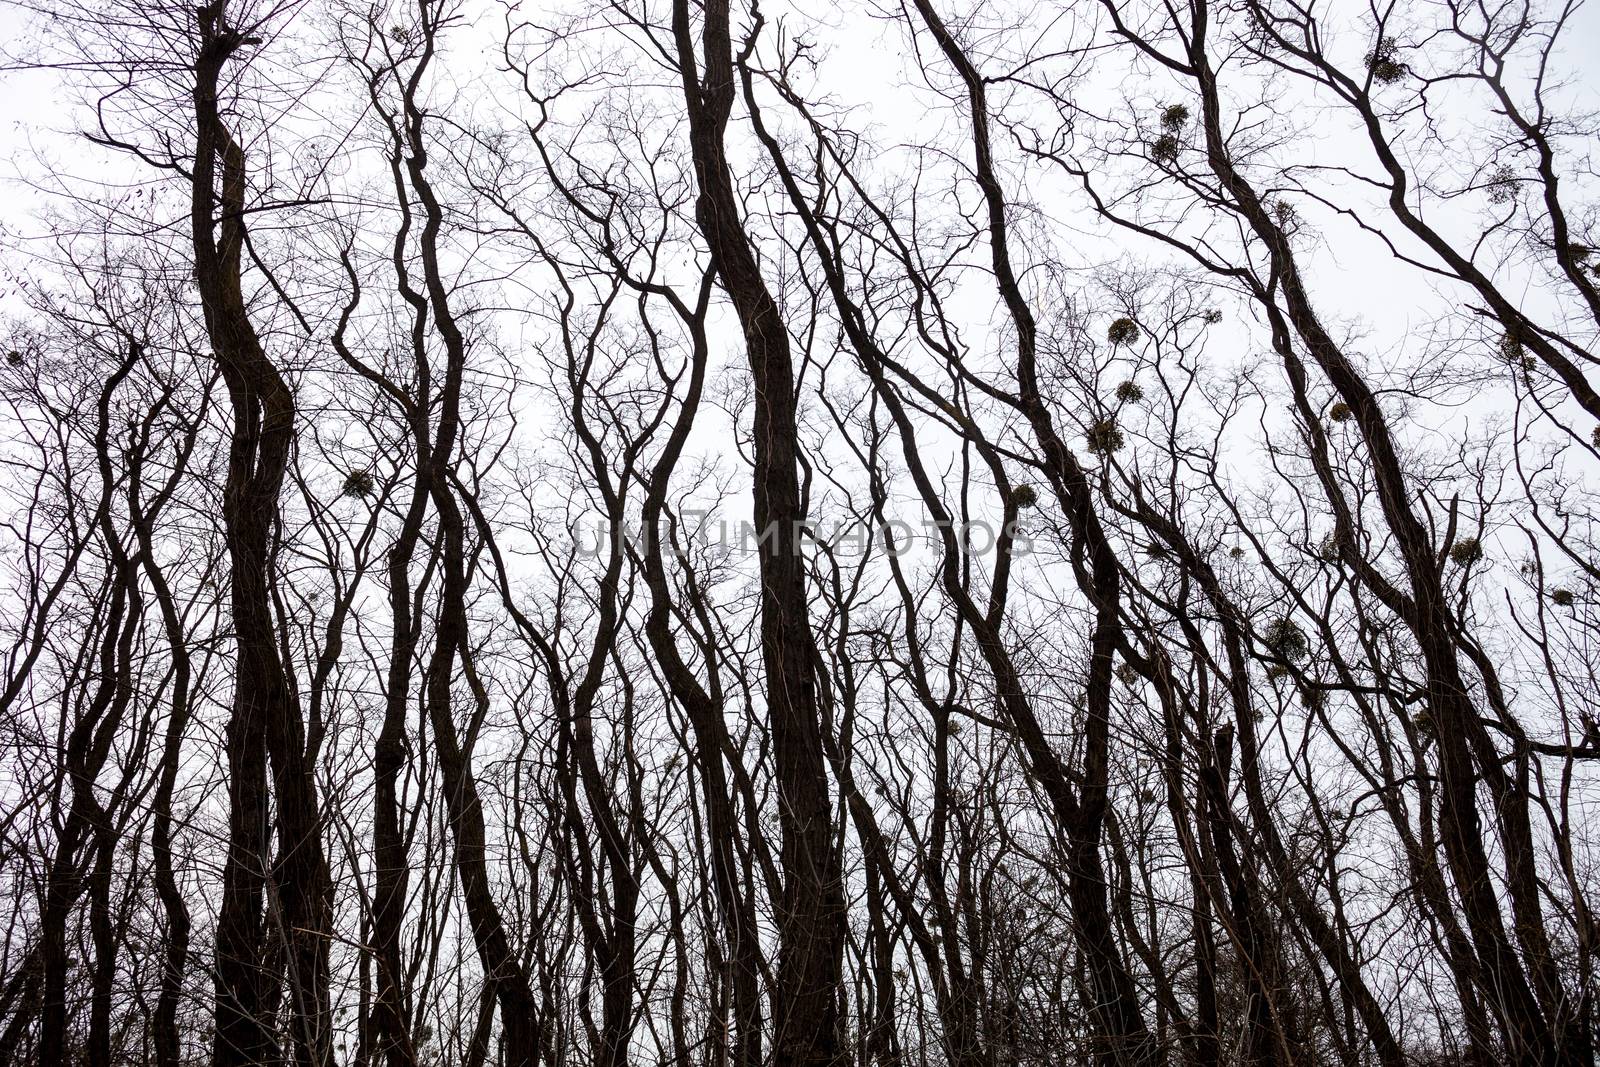 Silhouettes of bare trees with mistletoes against grey sky